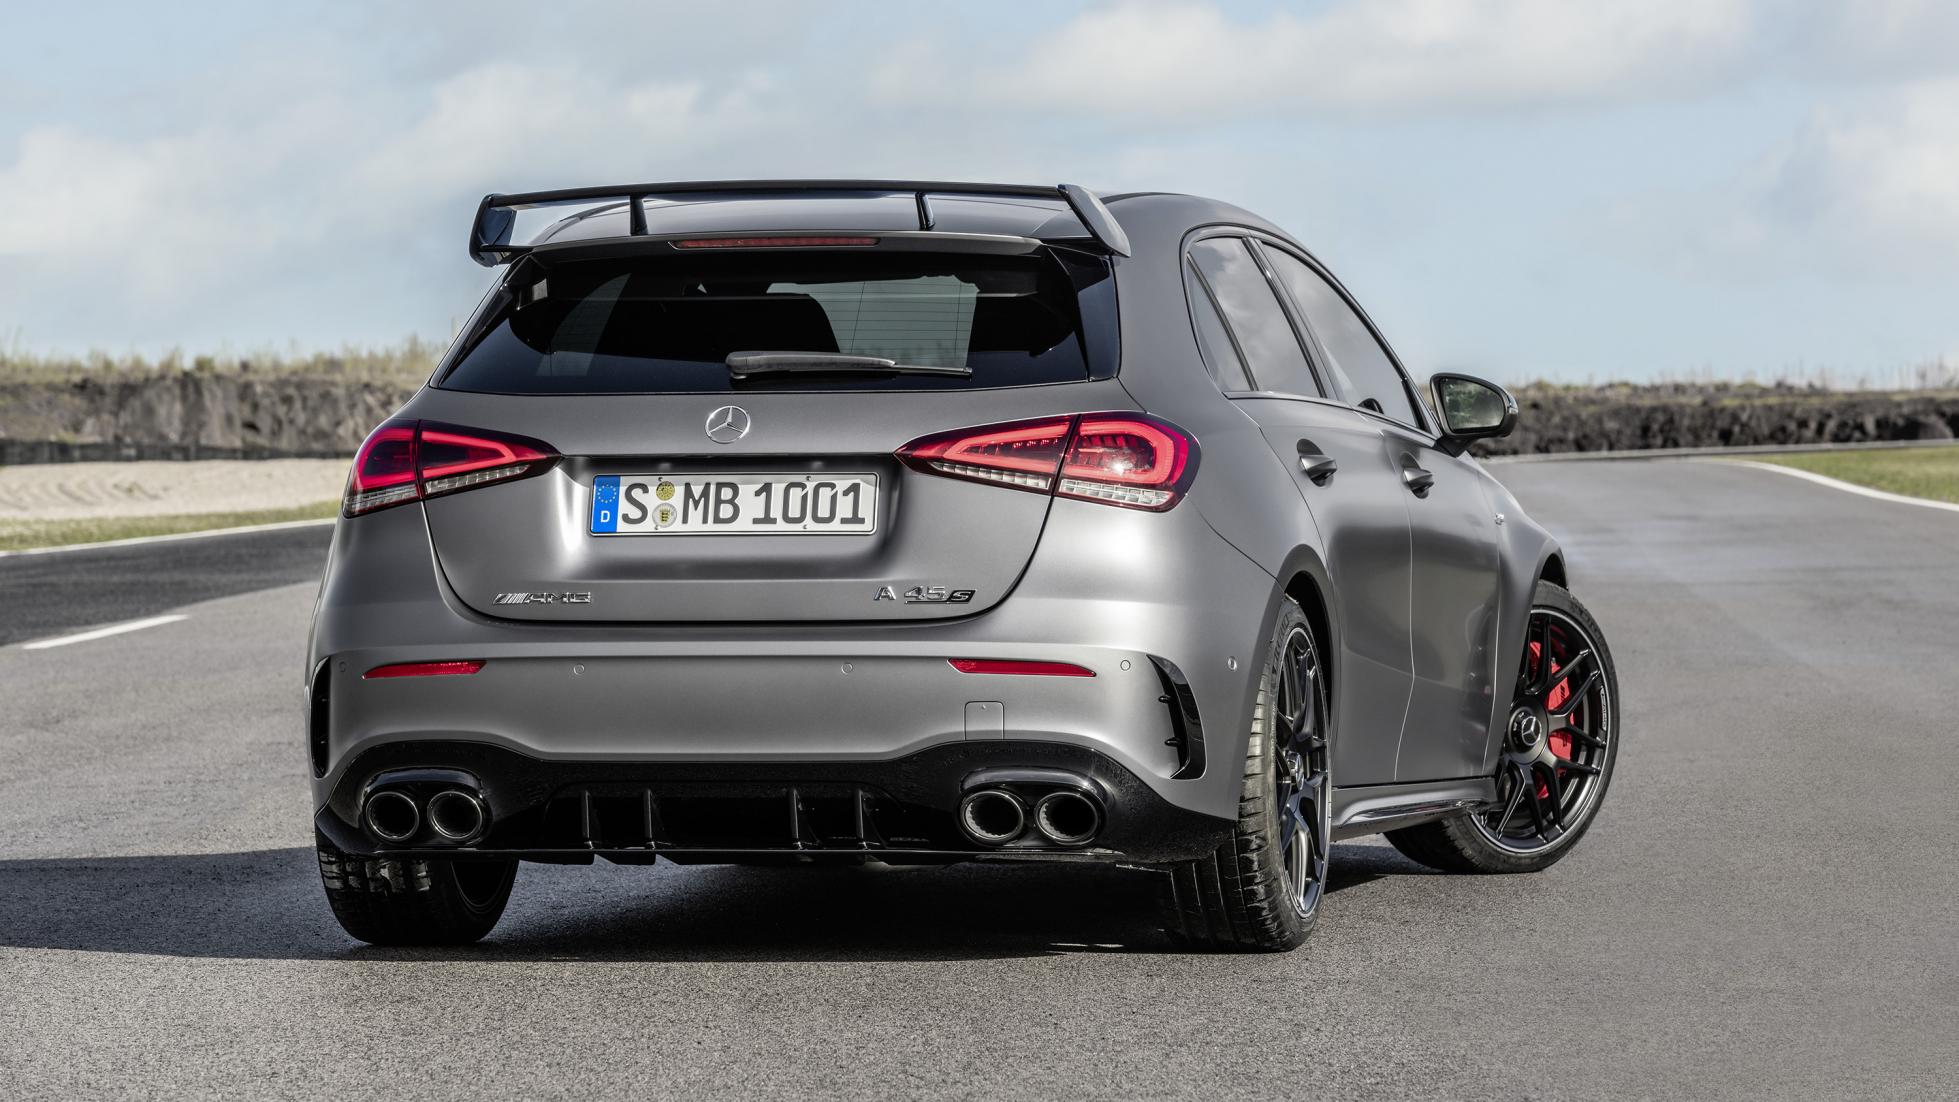 Mercedes Amg A 35 Sedan And A 45 S Pricing For South Africa